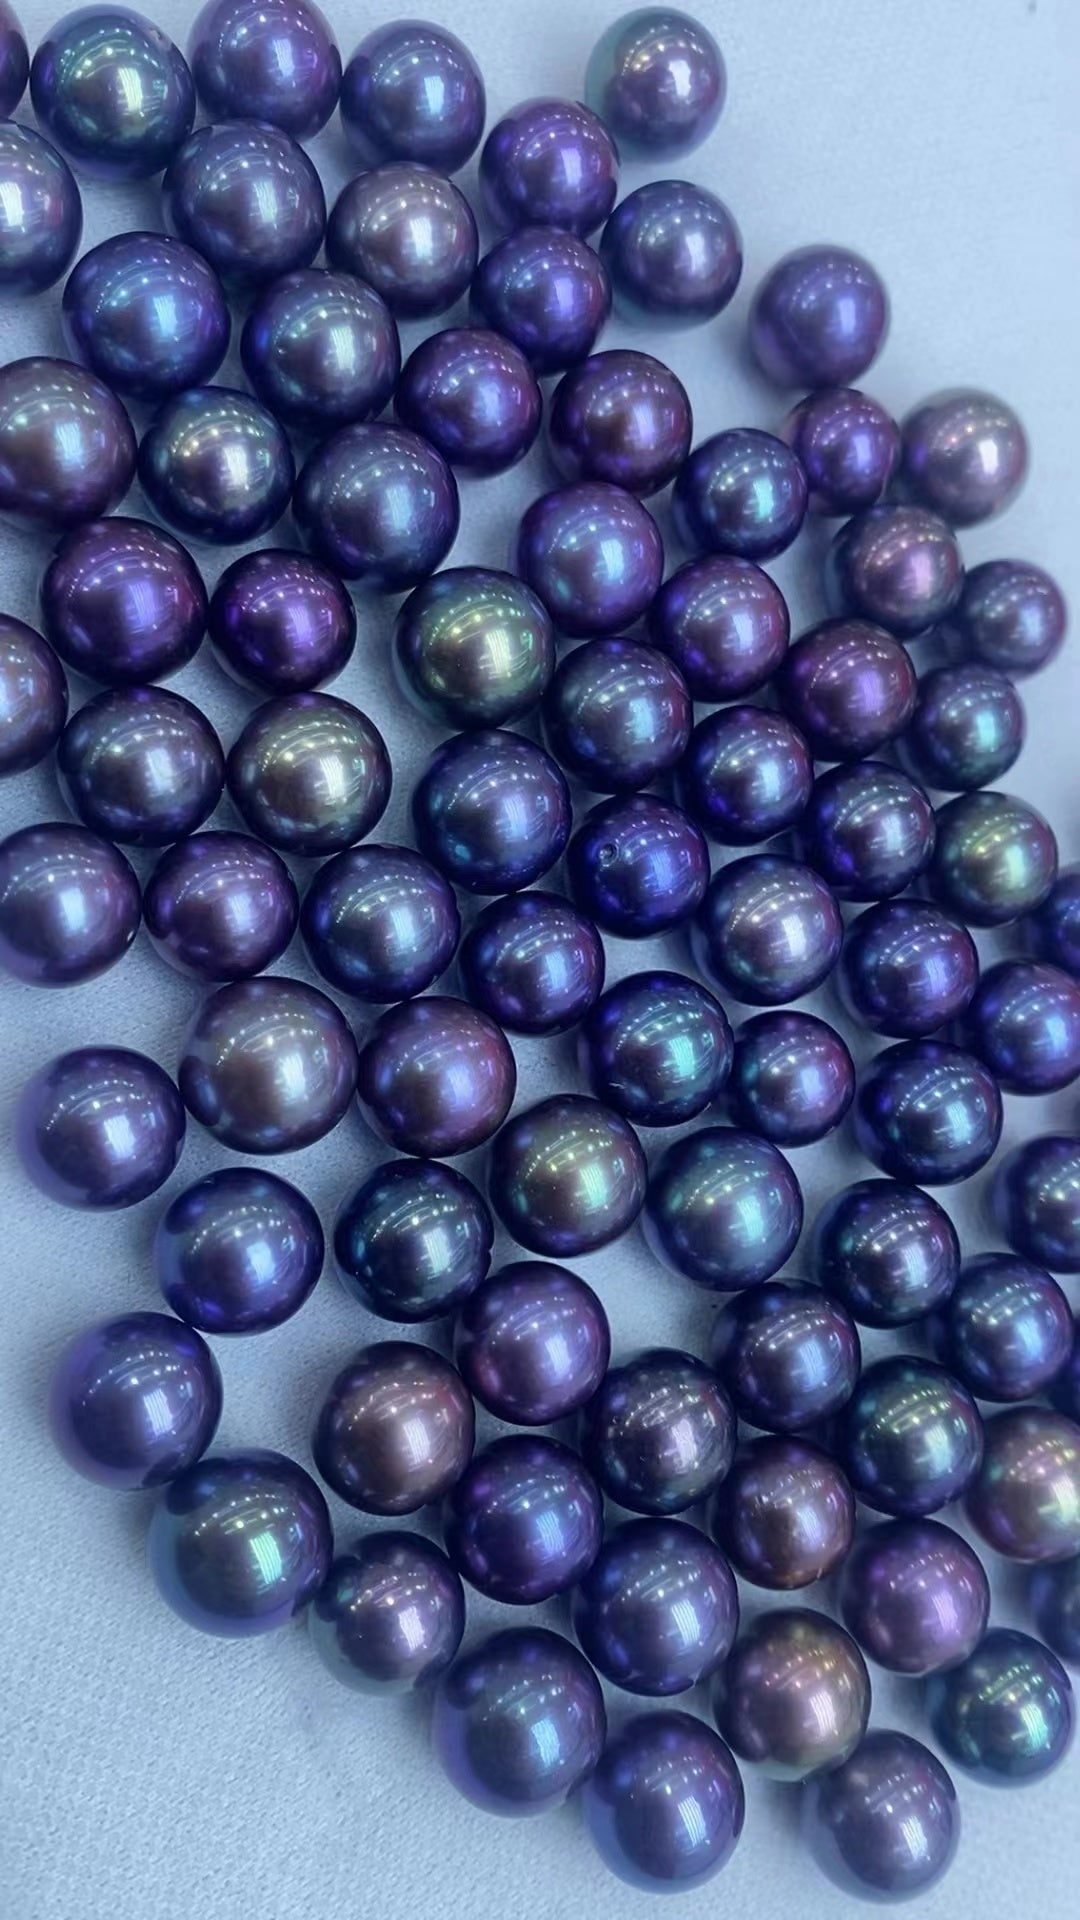 Great quality 12mm naked pearl natural flawless top natural purple pearls